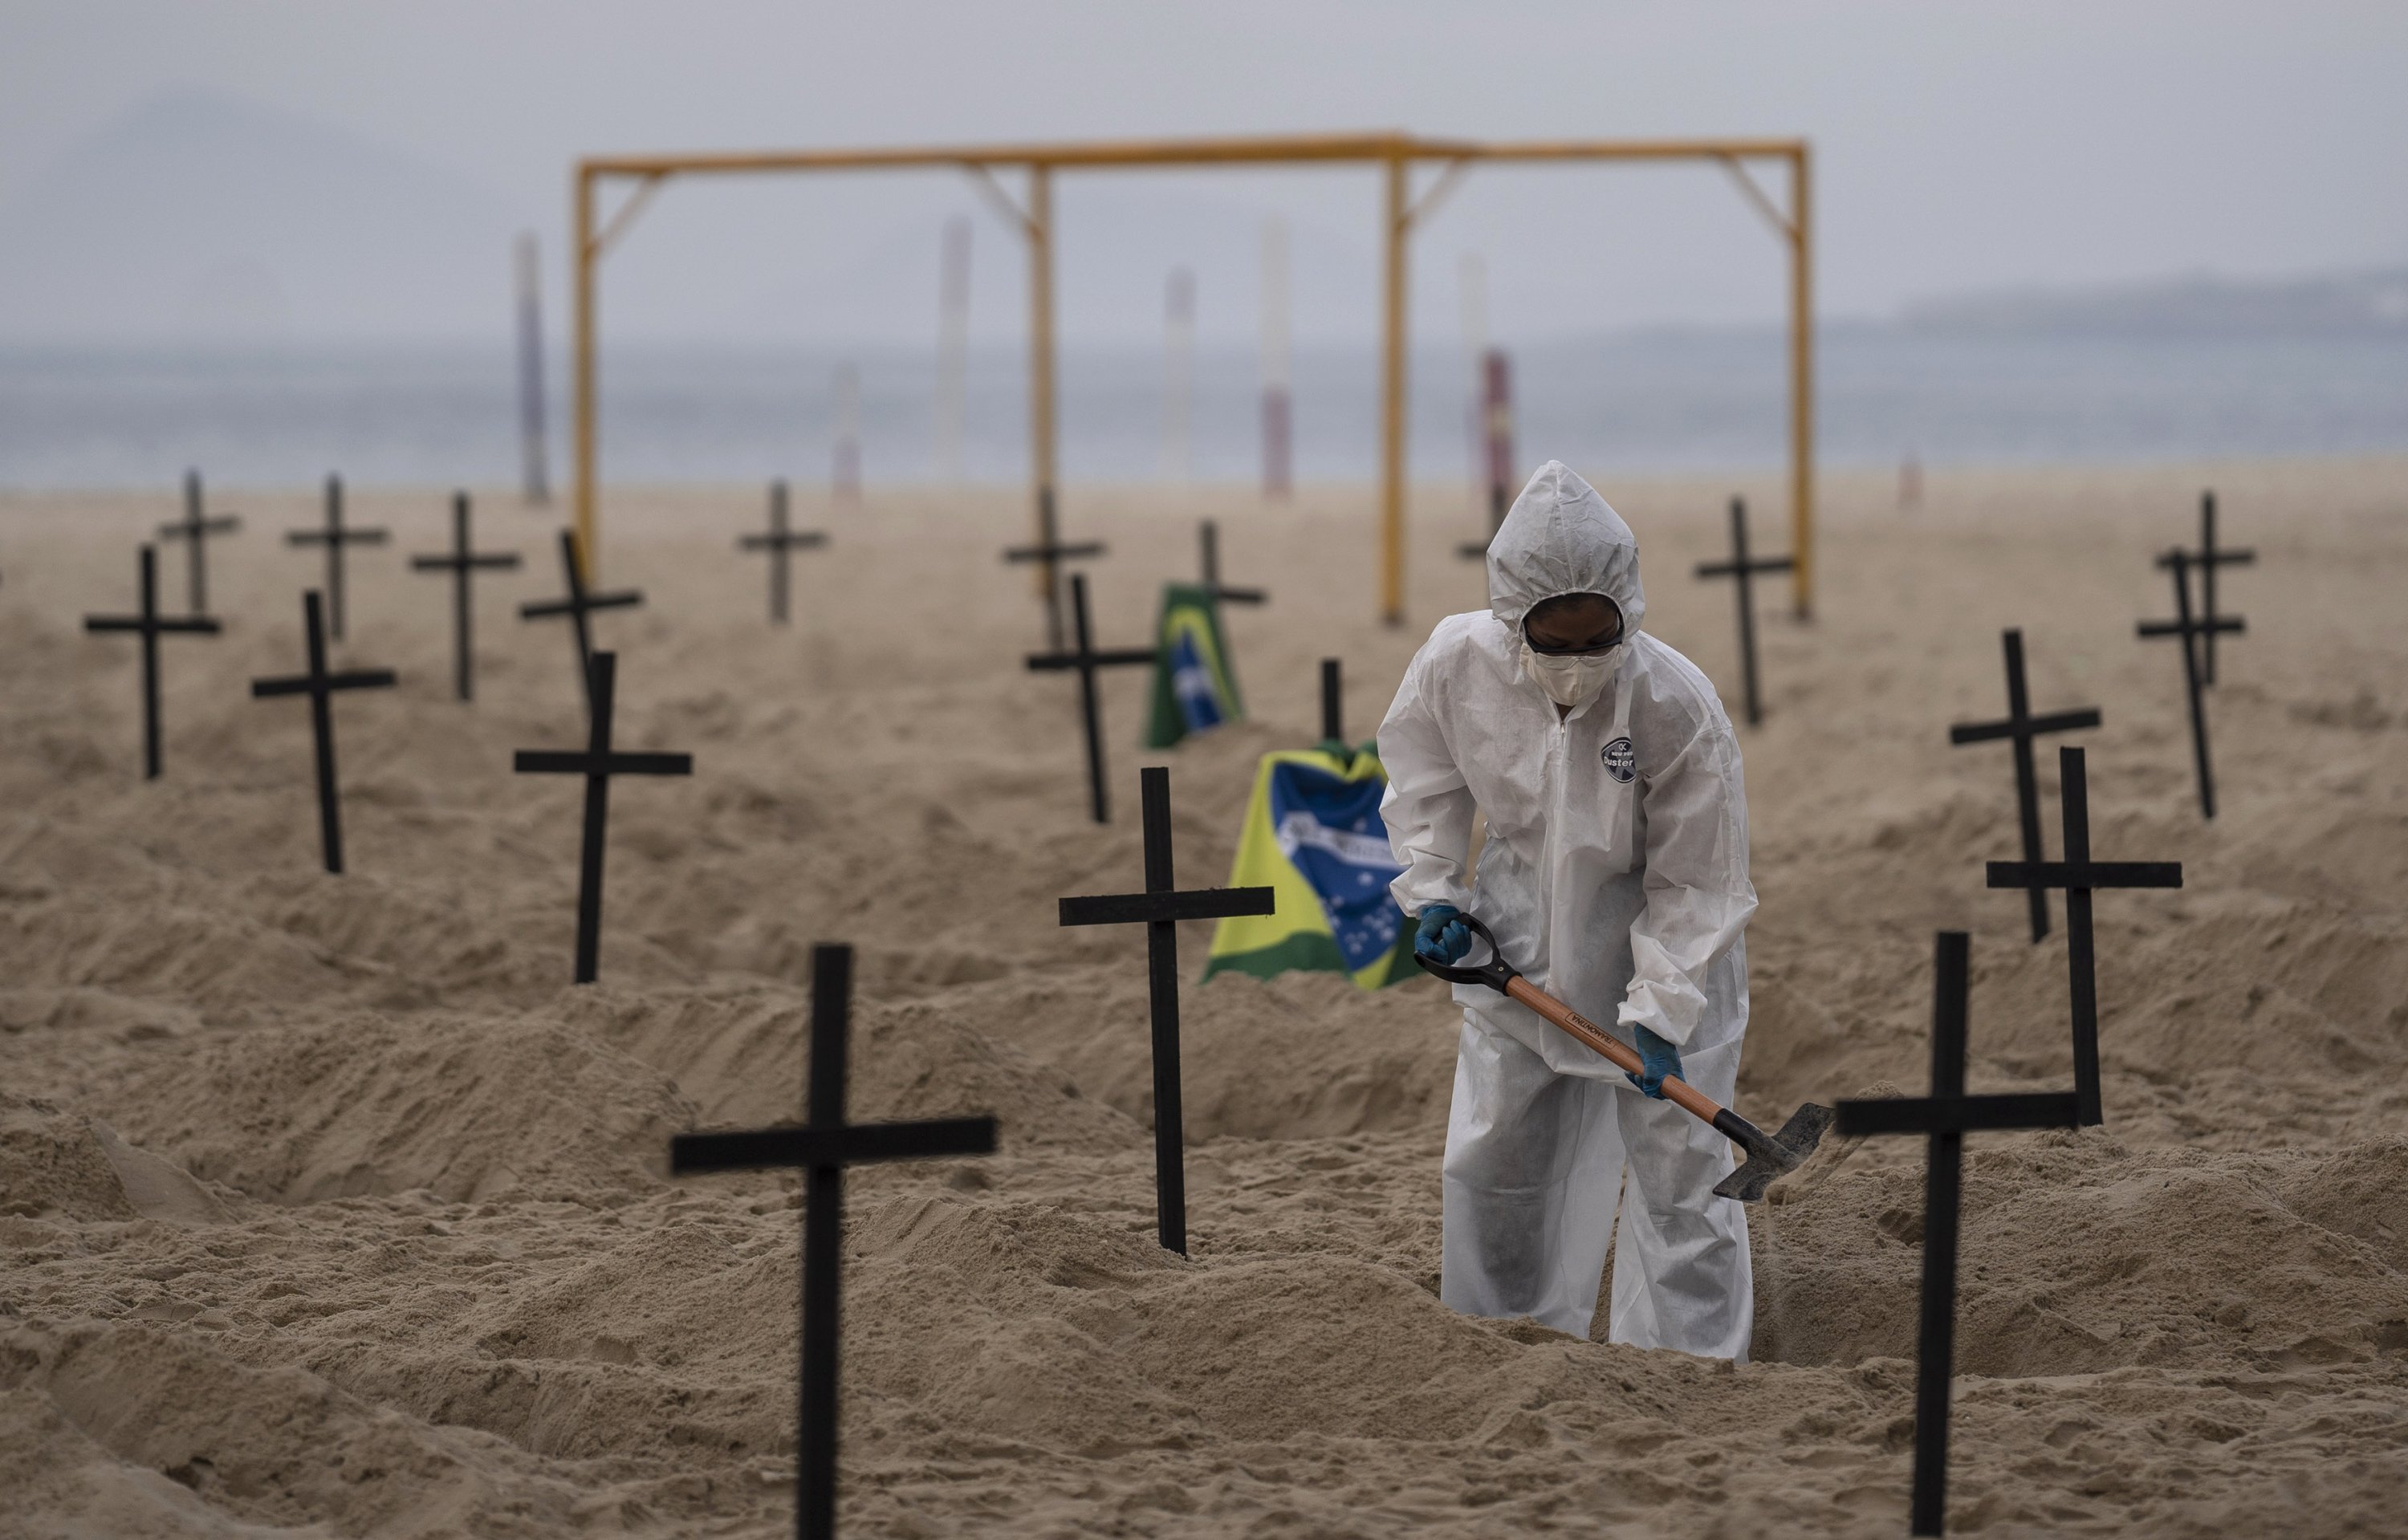 An activist digs symbolic graves on Copacabana beach, in front of a soccer goalpost, during a protest against the government